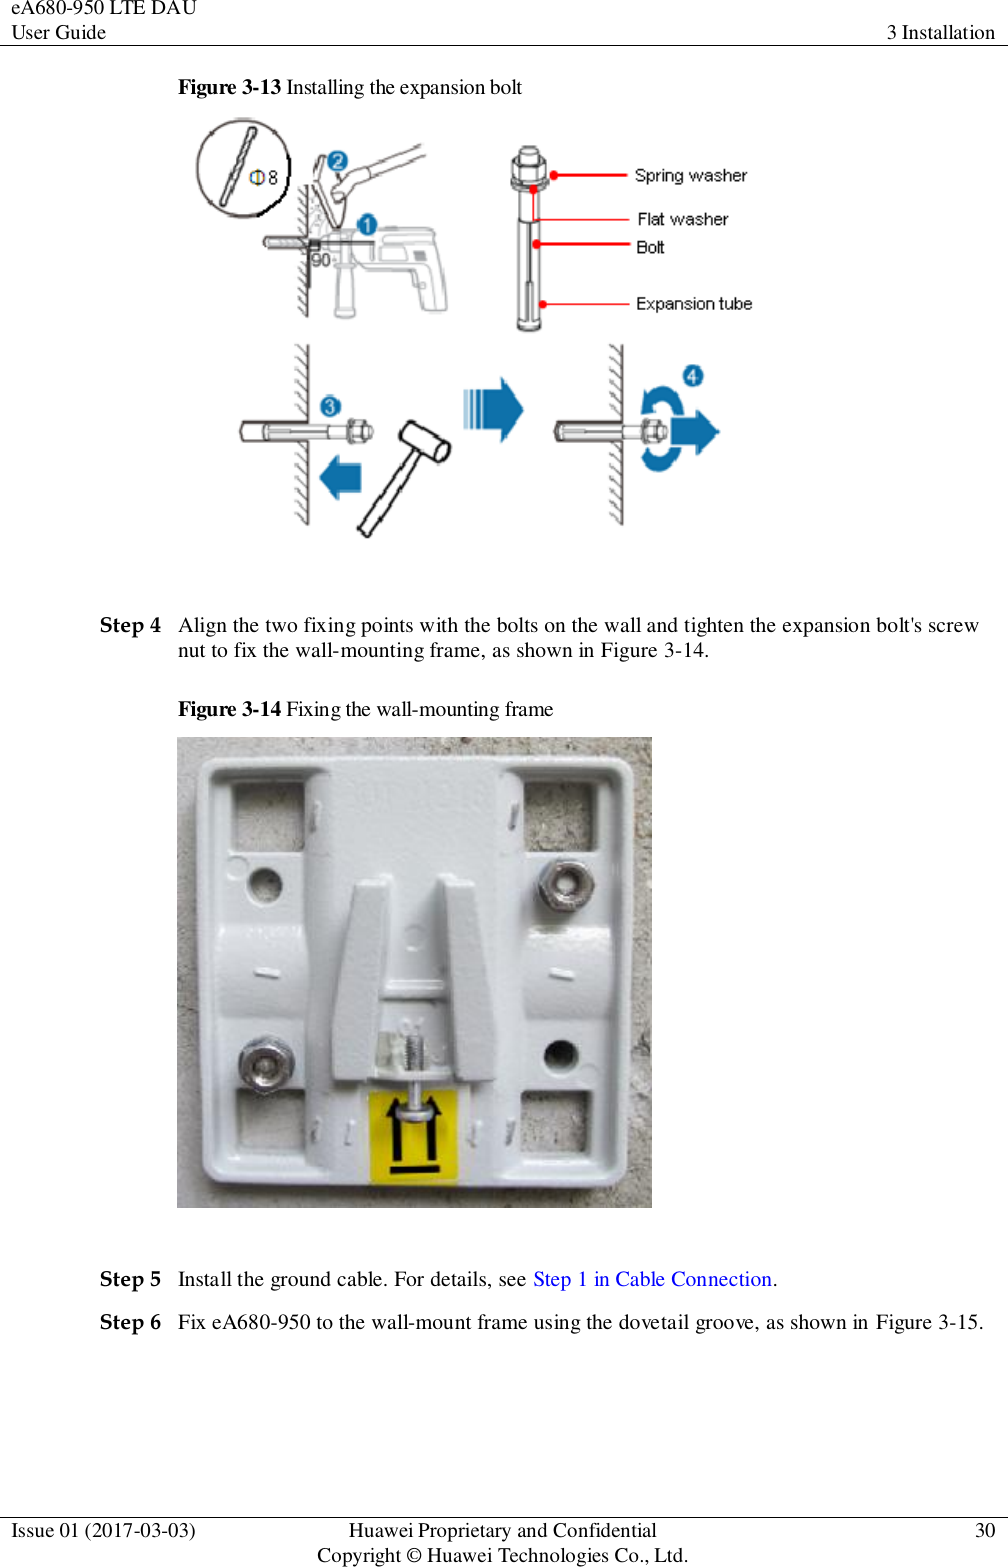 eA680-950 LTE DAU User Guide 3 Installation  Issue 01 (2017-03-03) Huawei Proprietary and Confidential                                     Copyright © Huawei Technologies Co., Ltd. 30  Figure 3-13 Installing the expansion bolt   Step 4 Align the two fixing points with the bolts on the wall and tighten the expansion bolt&apos;s screw nut to fix the wall-mounting frame, as shown in Figure 3-14. Figure 3-14 Fixing the wall-mounting frame   Step 5 Install the ground cable. For details, see Step 1 in Cable Connection.   Step 6 Fix eA680-950 to the wall-mount frame using the dovetail groove, as shown in Figure 3-15. 